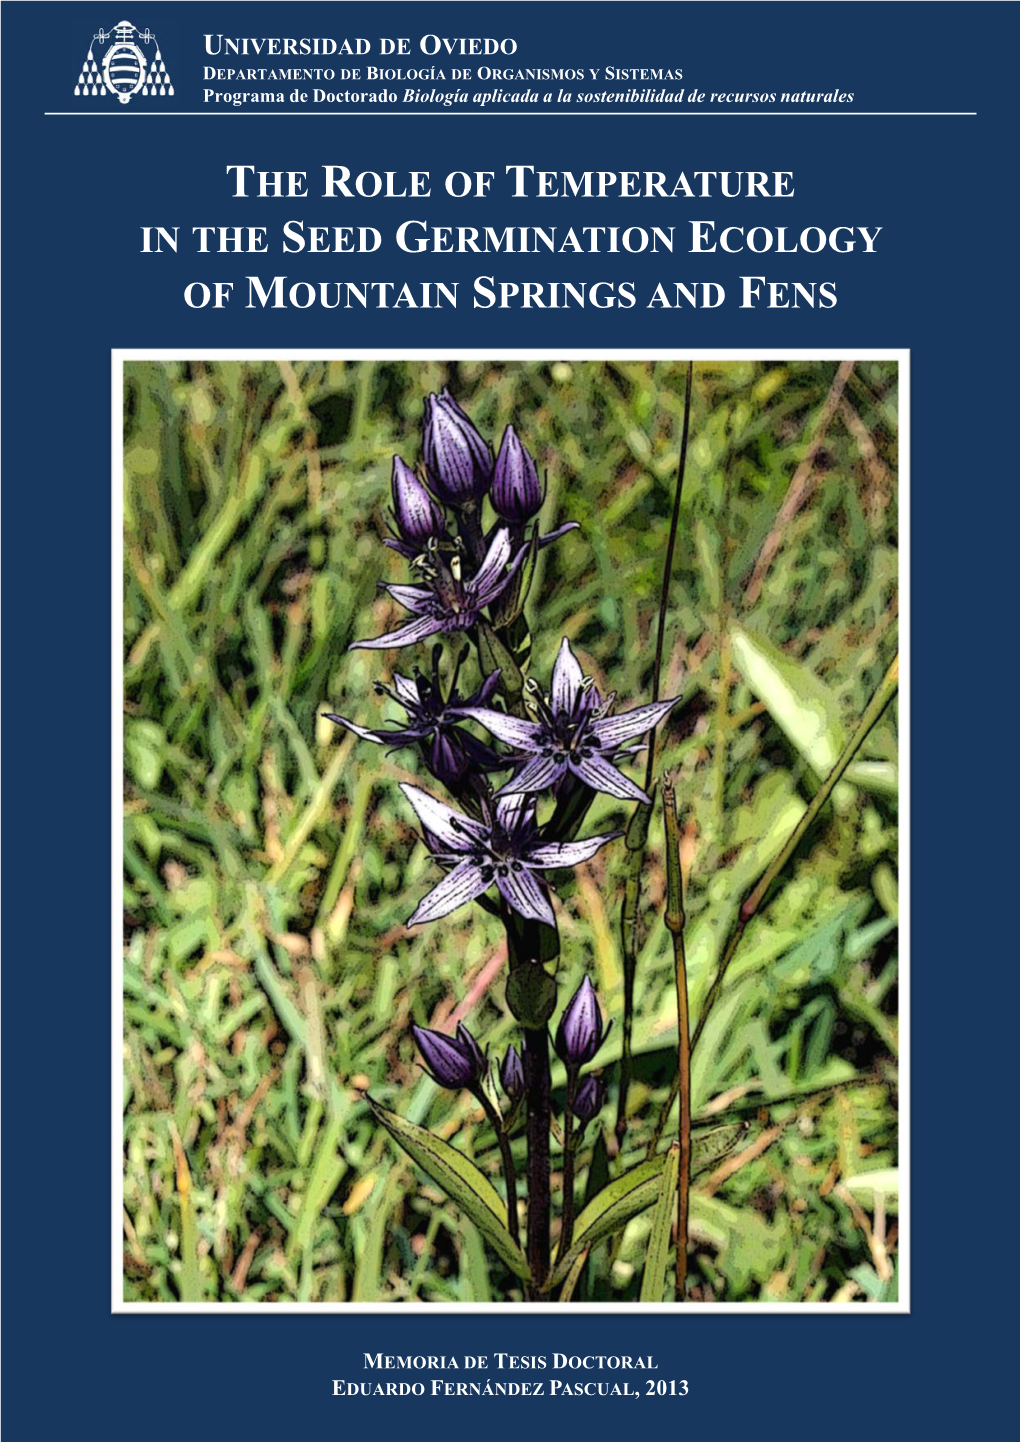 The Role of Temperature in the Seed Germination Ecology of Mountain Springs and Fens